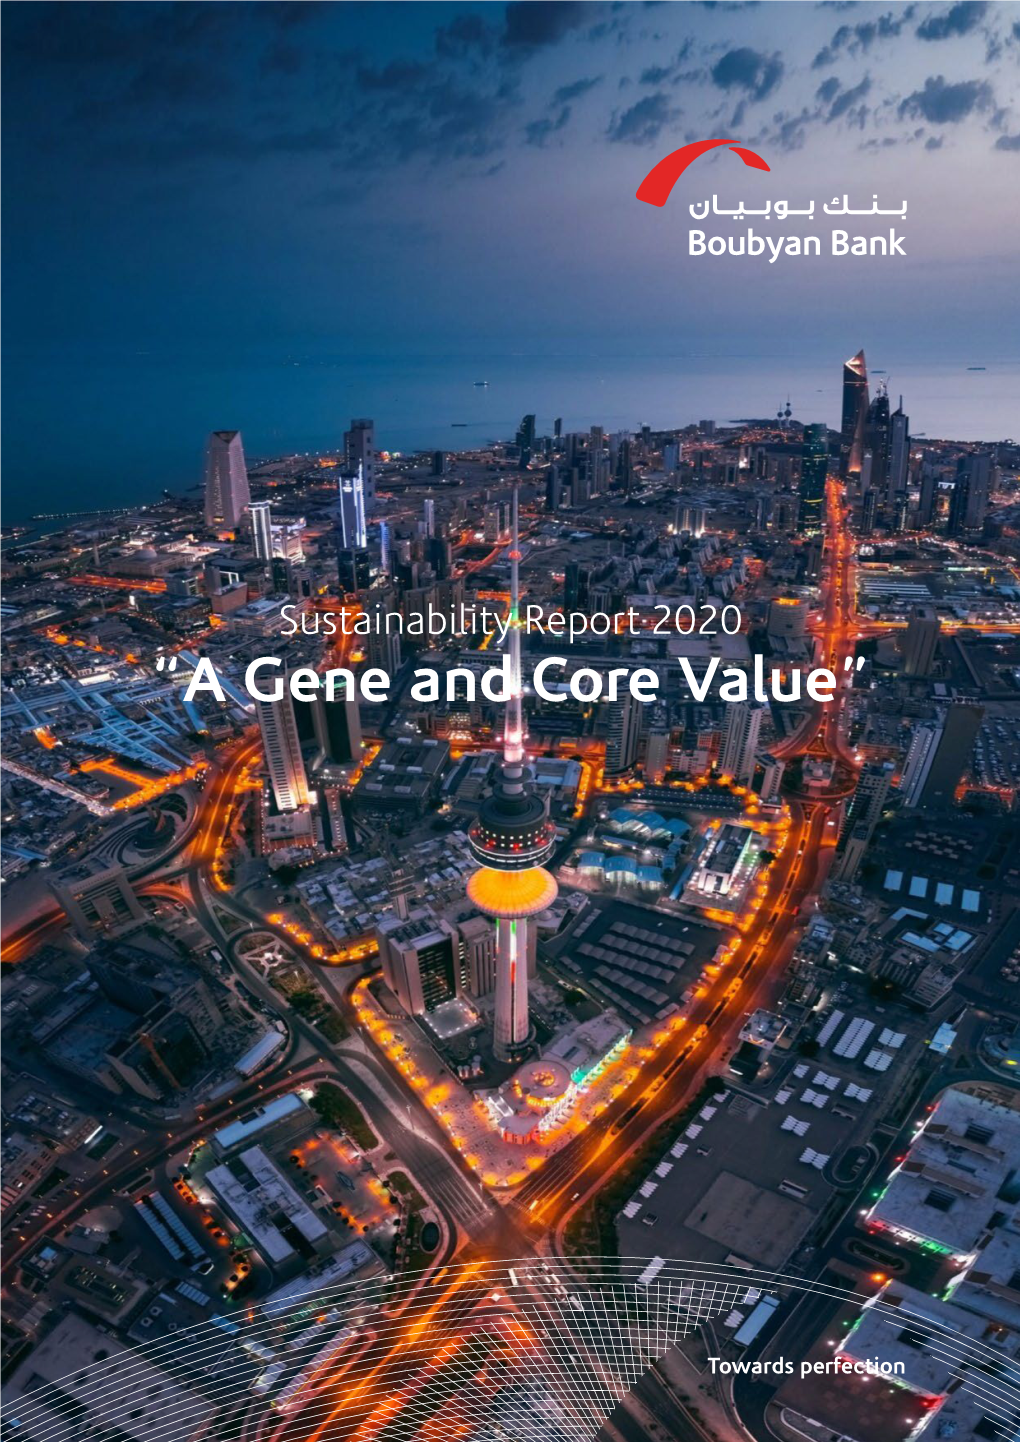 A Gene and Core Value“